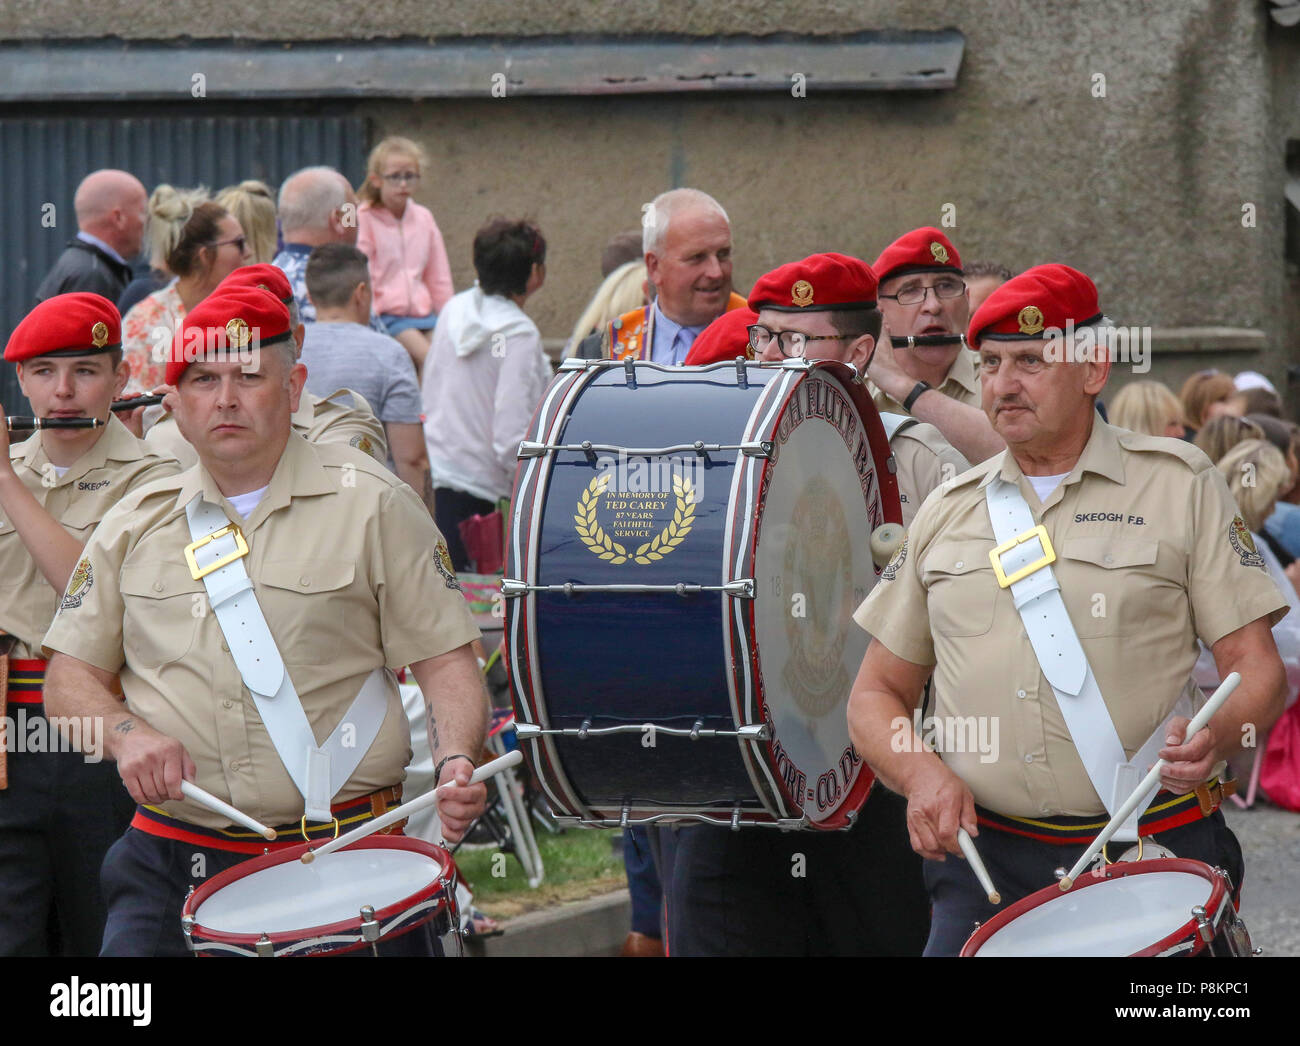 Donaghcloney, County Down, Northern Ireland.12 July 2018. Orange order parade on 12th July in Northern Ireland. The Twelfth of July is marked by Orange Order parades across Northern Ireland. The largest parade in County Down this year was at Donaghcloney. Thousands turned out to see the parade through the village. The parades across Northern Ireland mark the victory of William of Orange over James at the Battle of the Boyne in 1690. Thousands turned out to watch the colourful parade at Donaghcloney. Credit: CAZIMB/Alamy Live News. Stock Photo